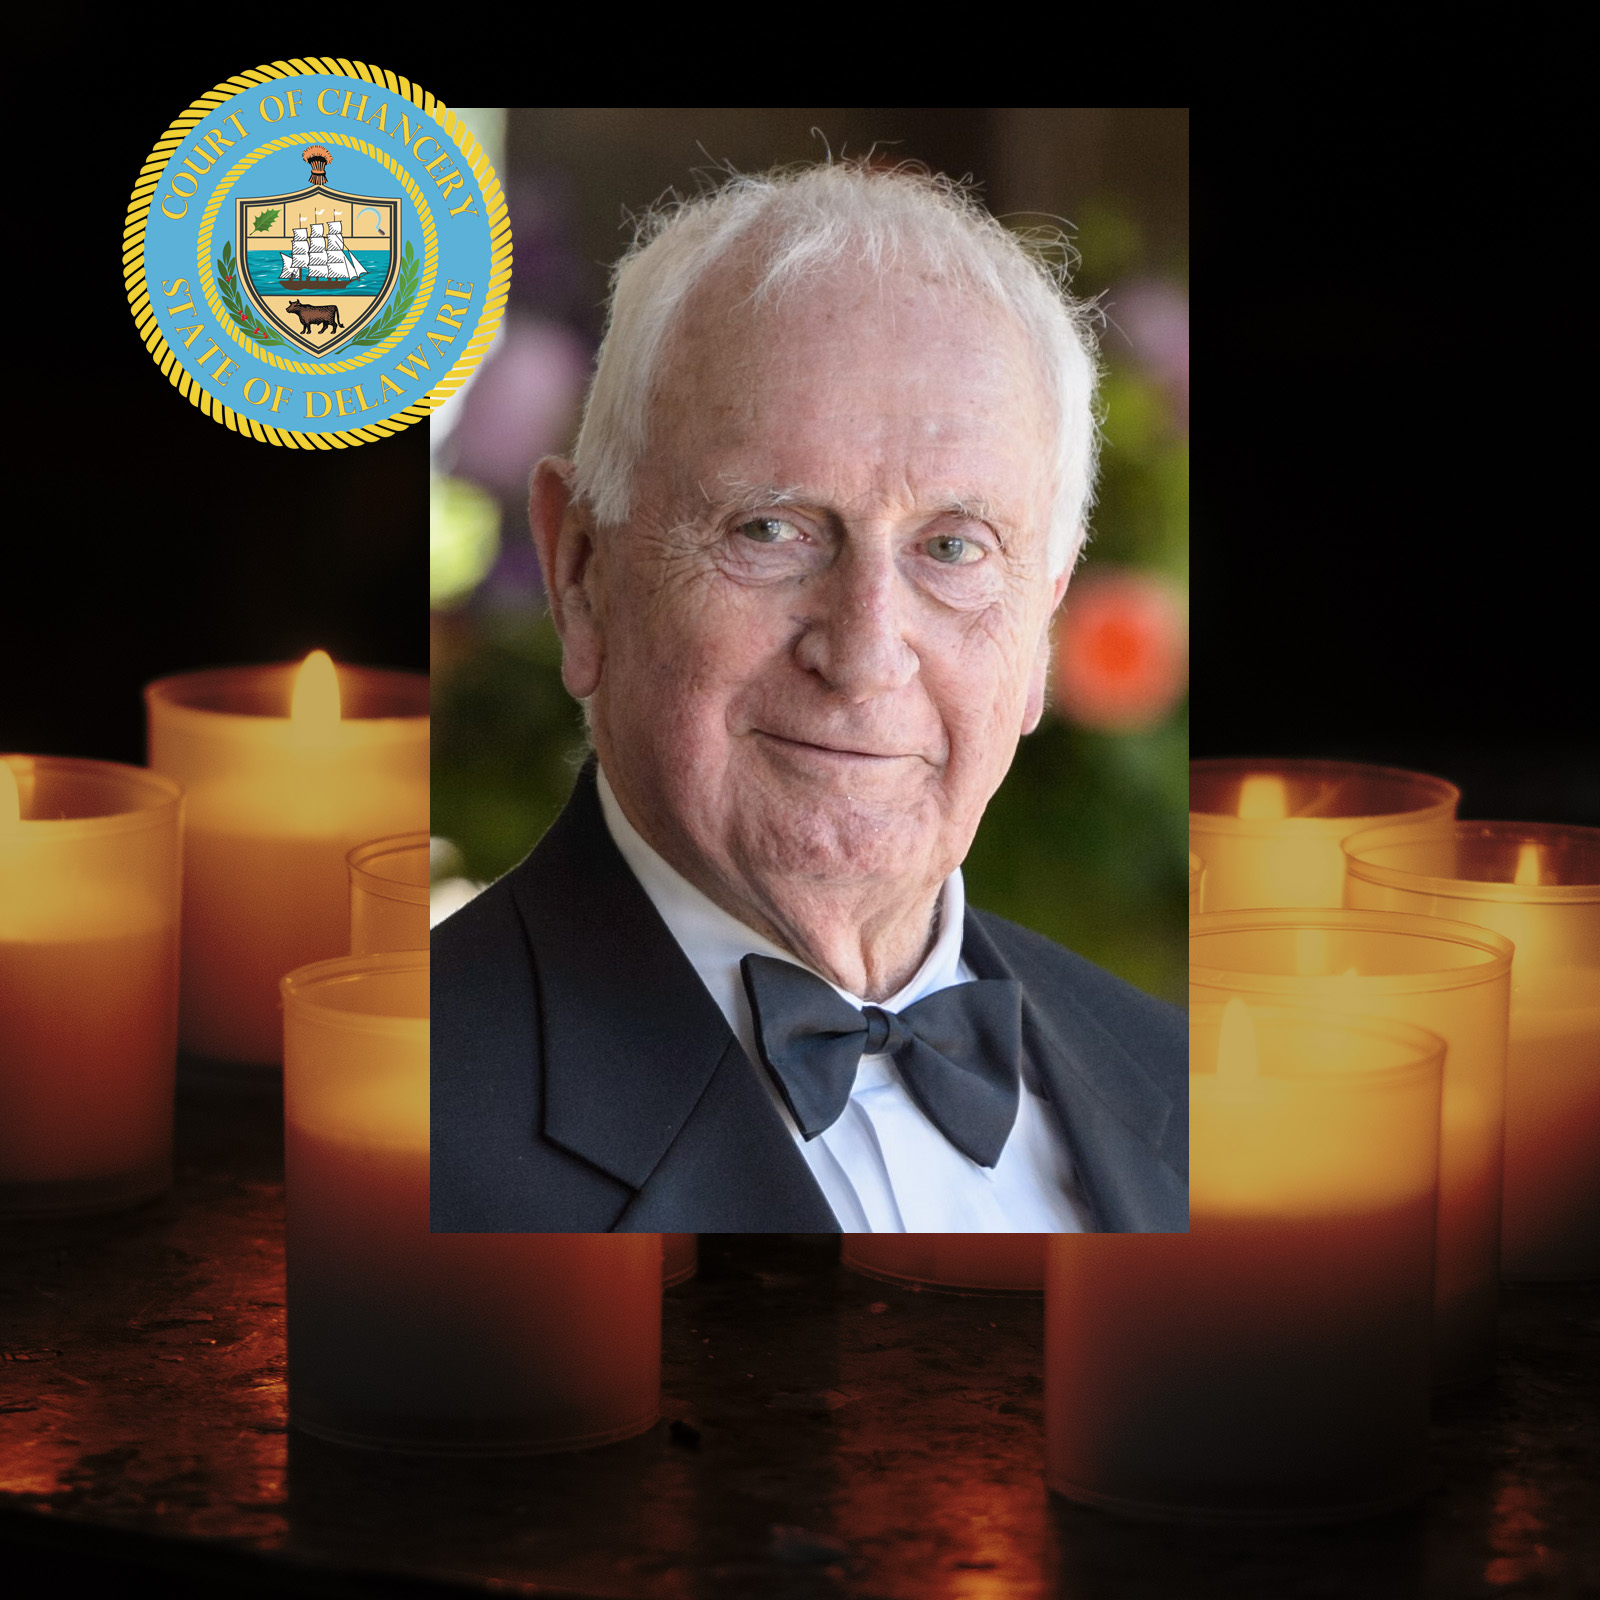 The Court of Chancery Mourns the Passing of Chancellor Grover C. Brown